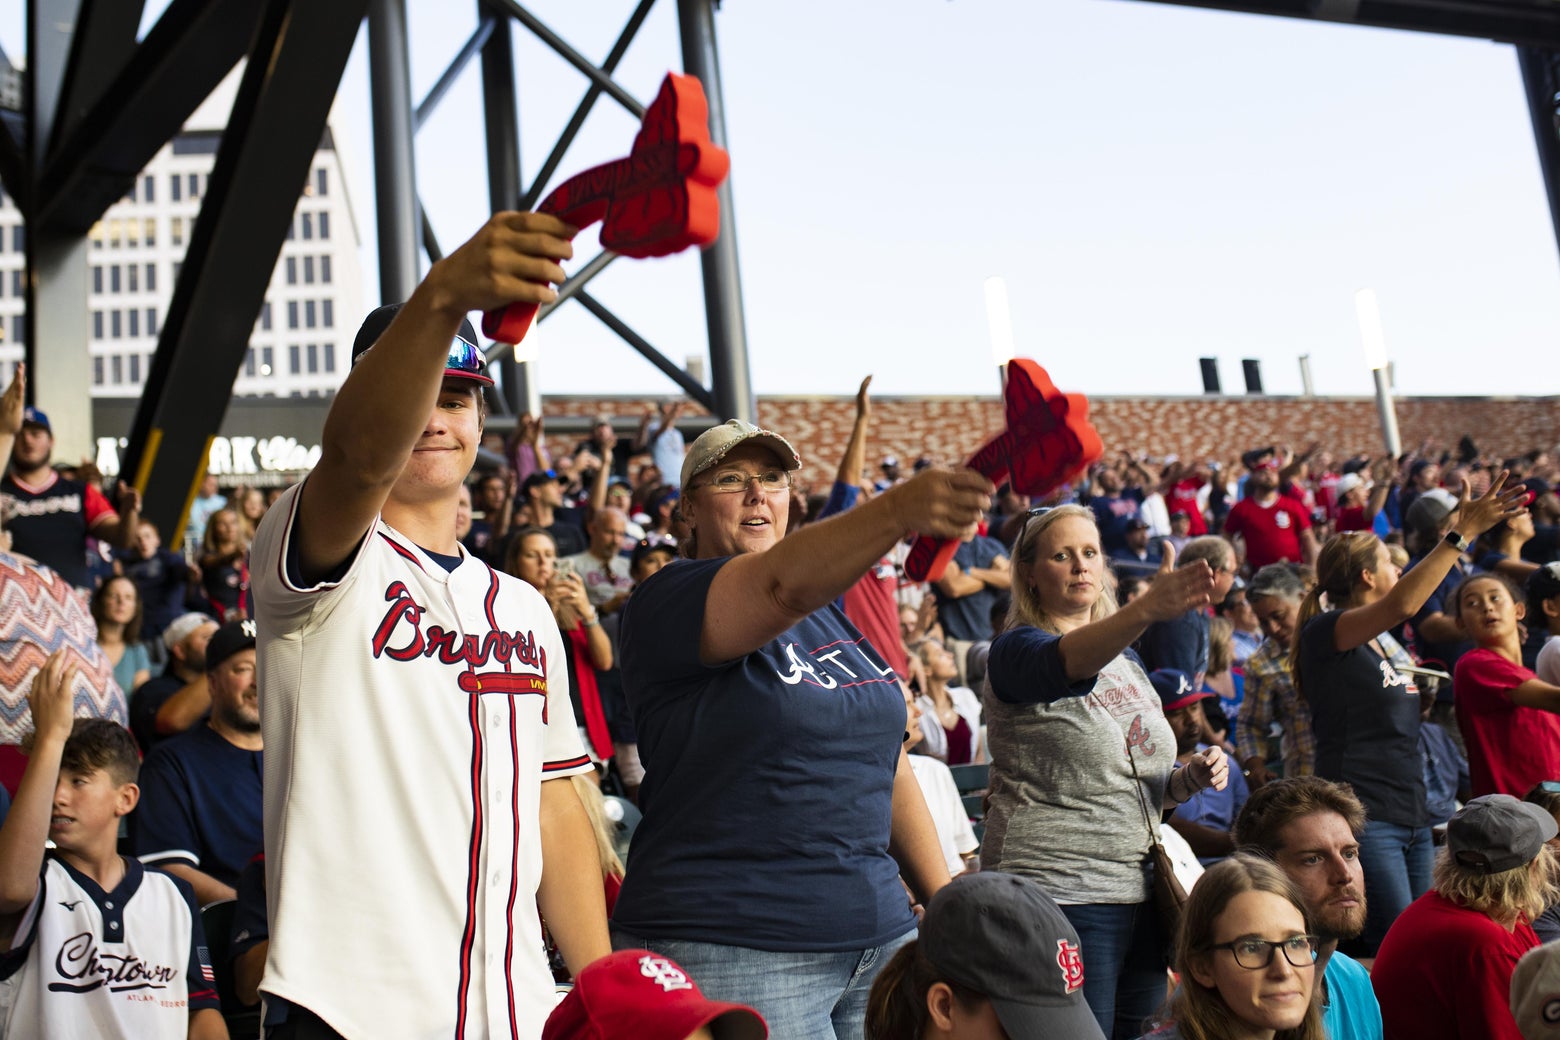 The Atlanta Braves tomahawk chop and name controversy involves the name and tomahawk  chop tradition by the Atlanta Braves, an American Major League Baseball  (MLB) franchise. Native Americans have been questioning the